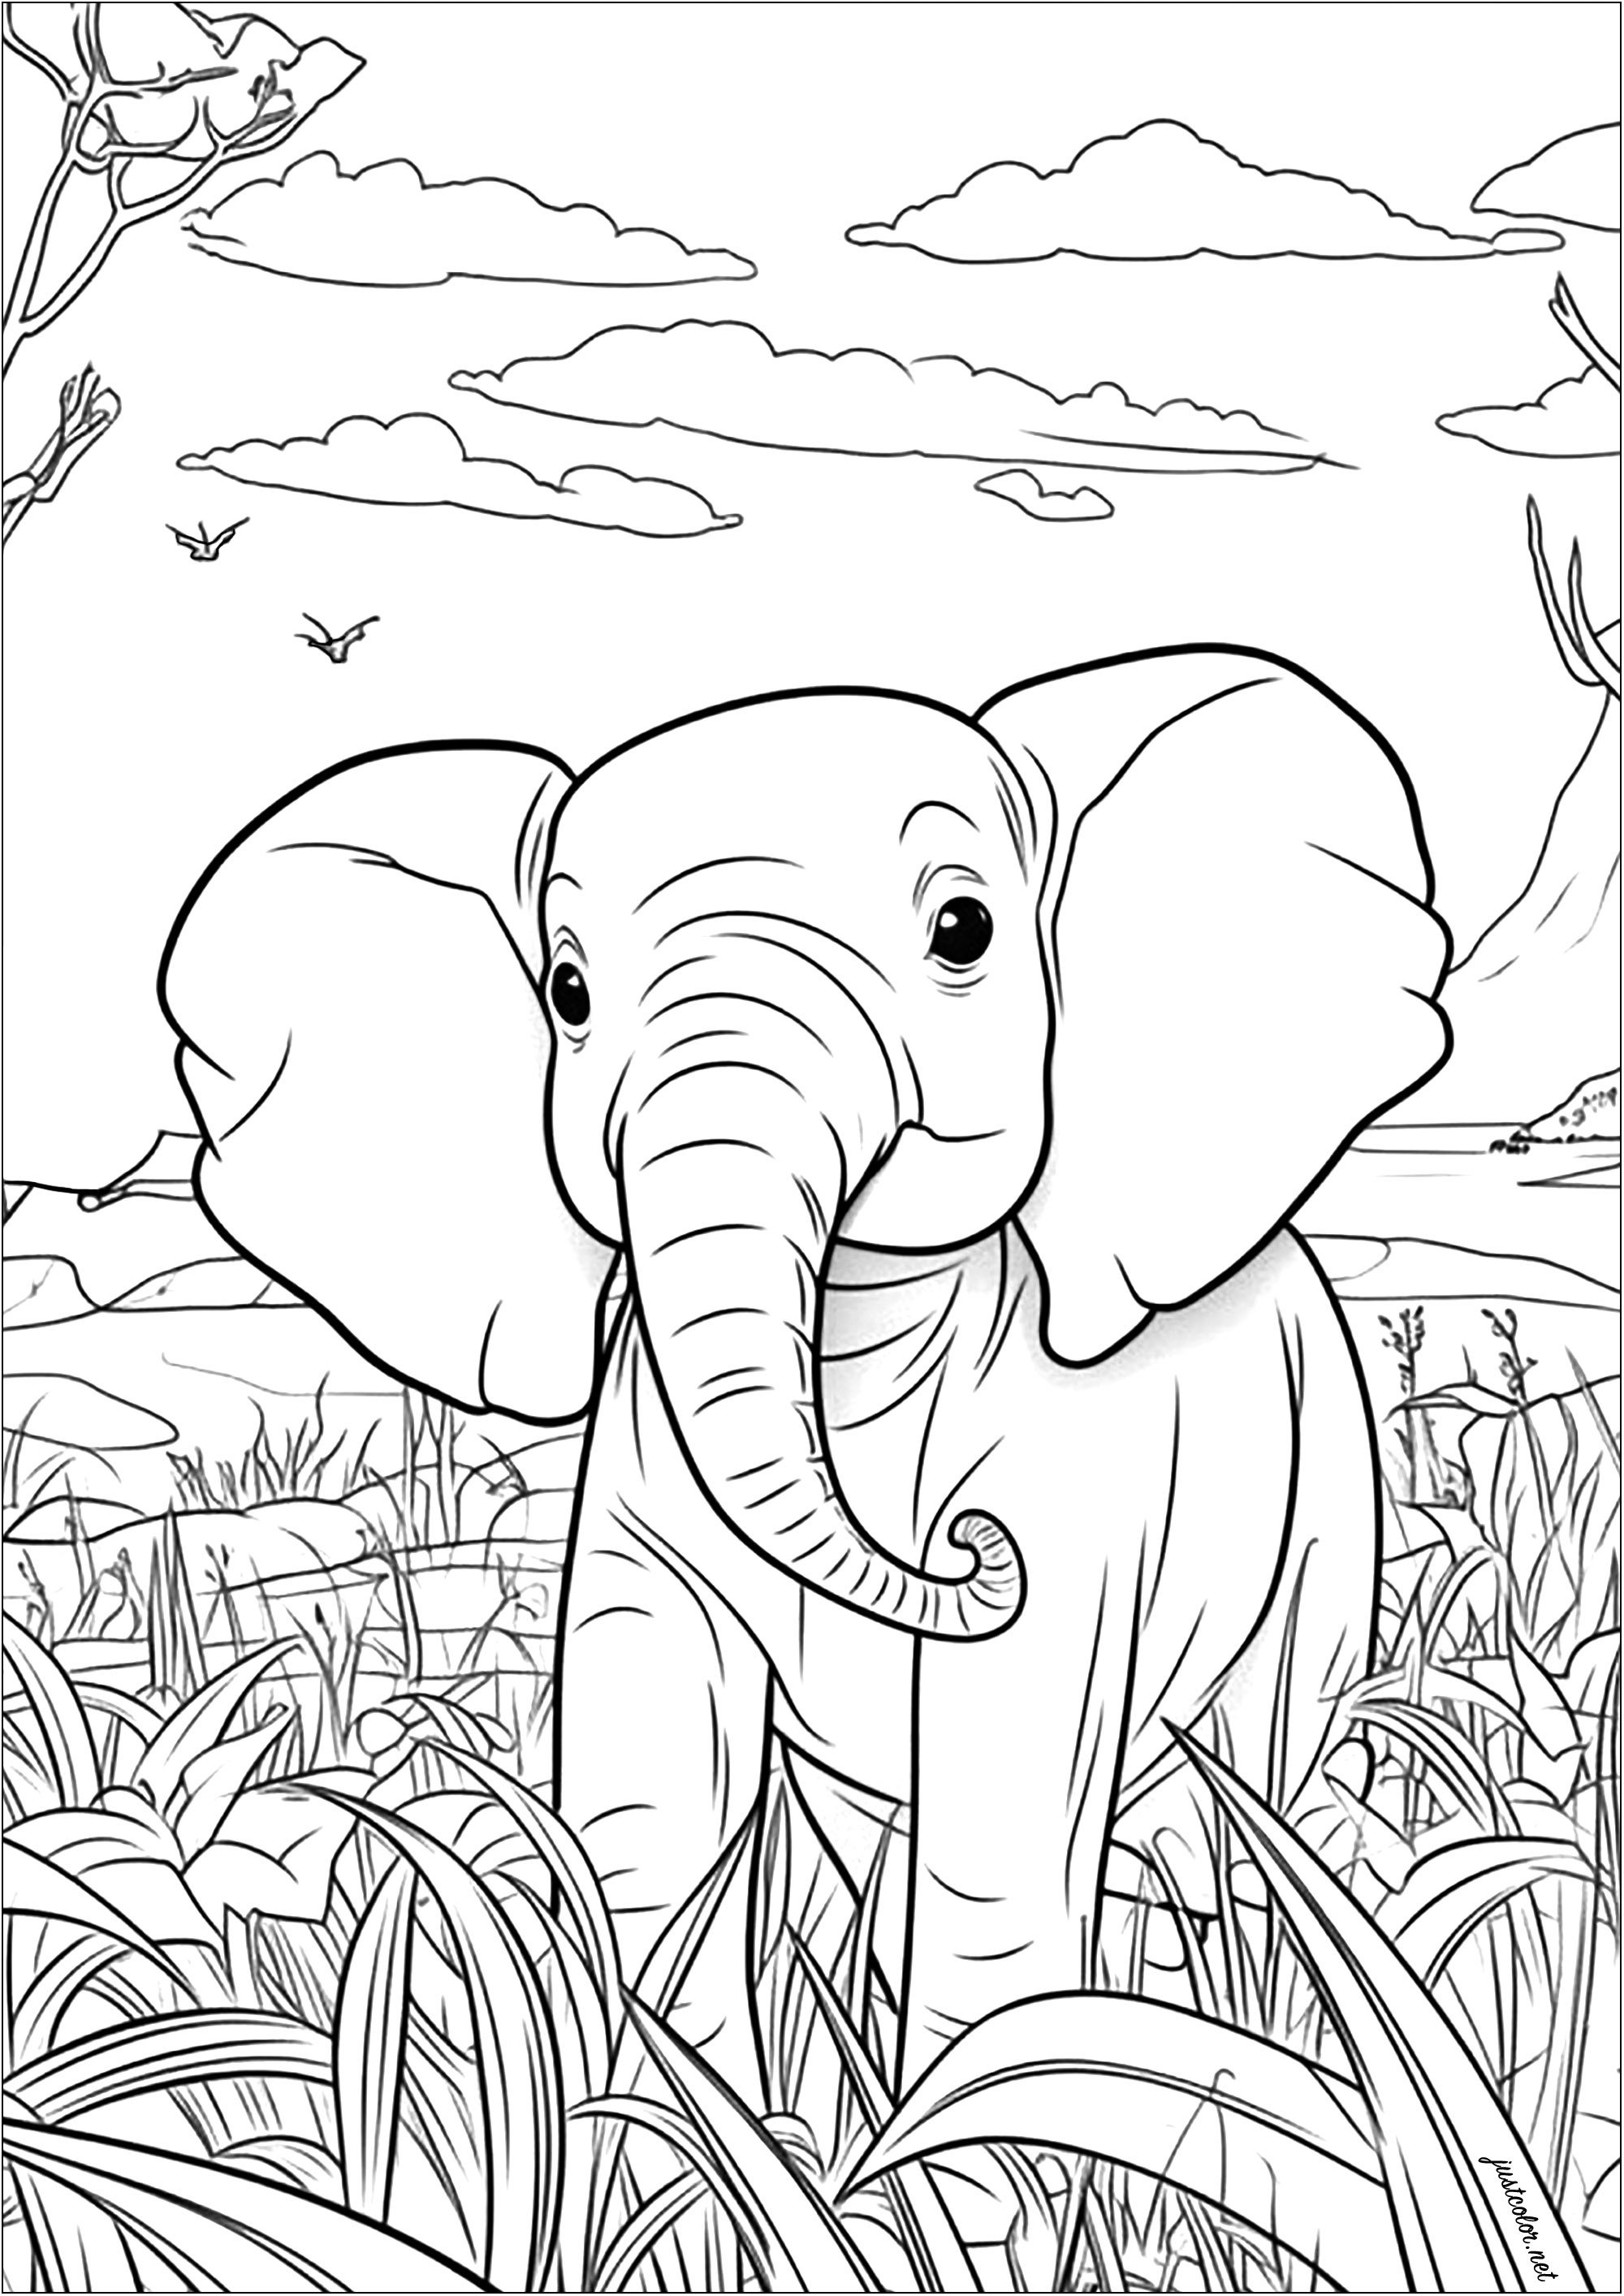 This beautiful coloring page shows a young elephant strolling through the Savannah. You can see that it's surrounded by tall trees and grasses.